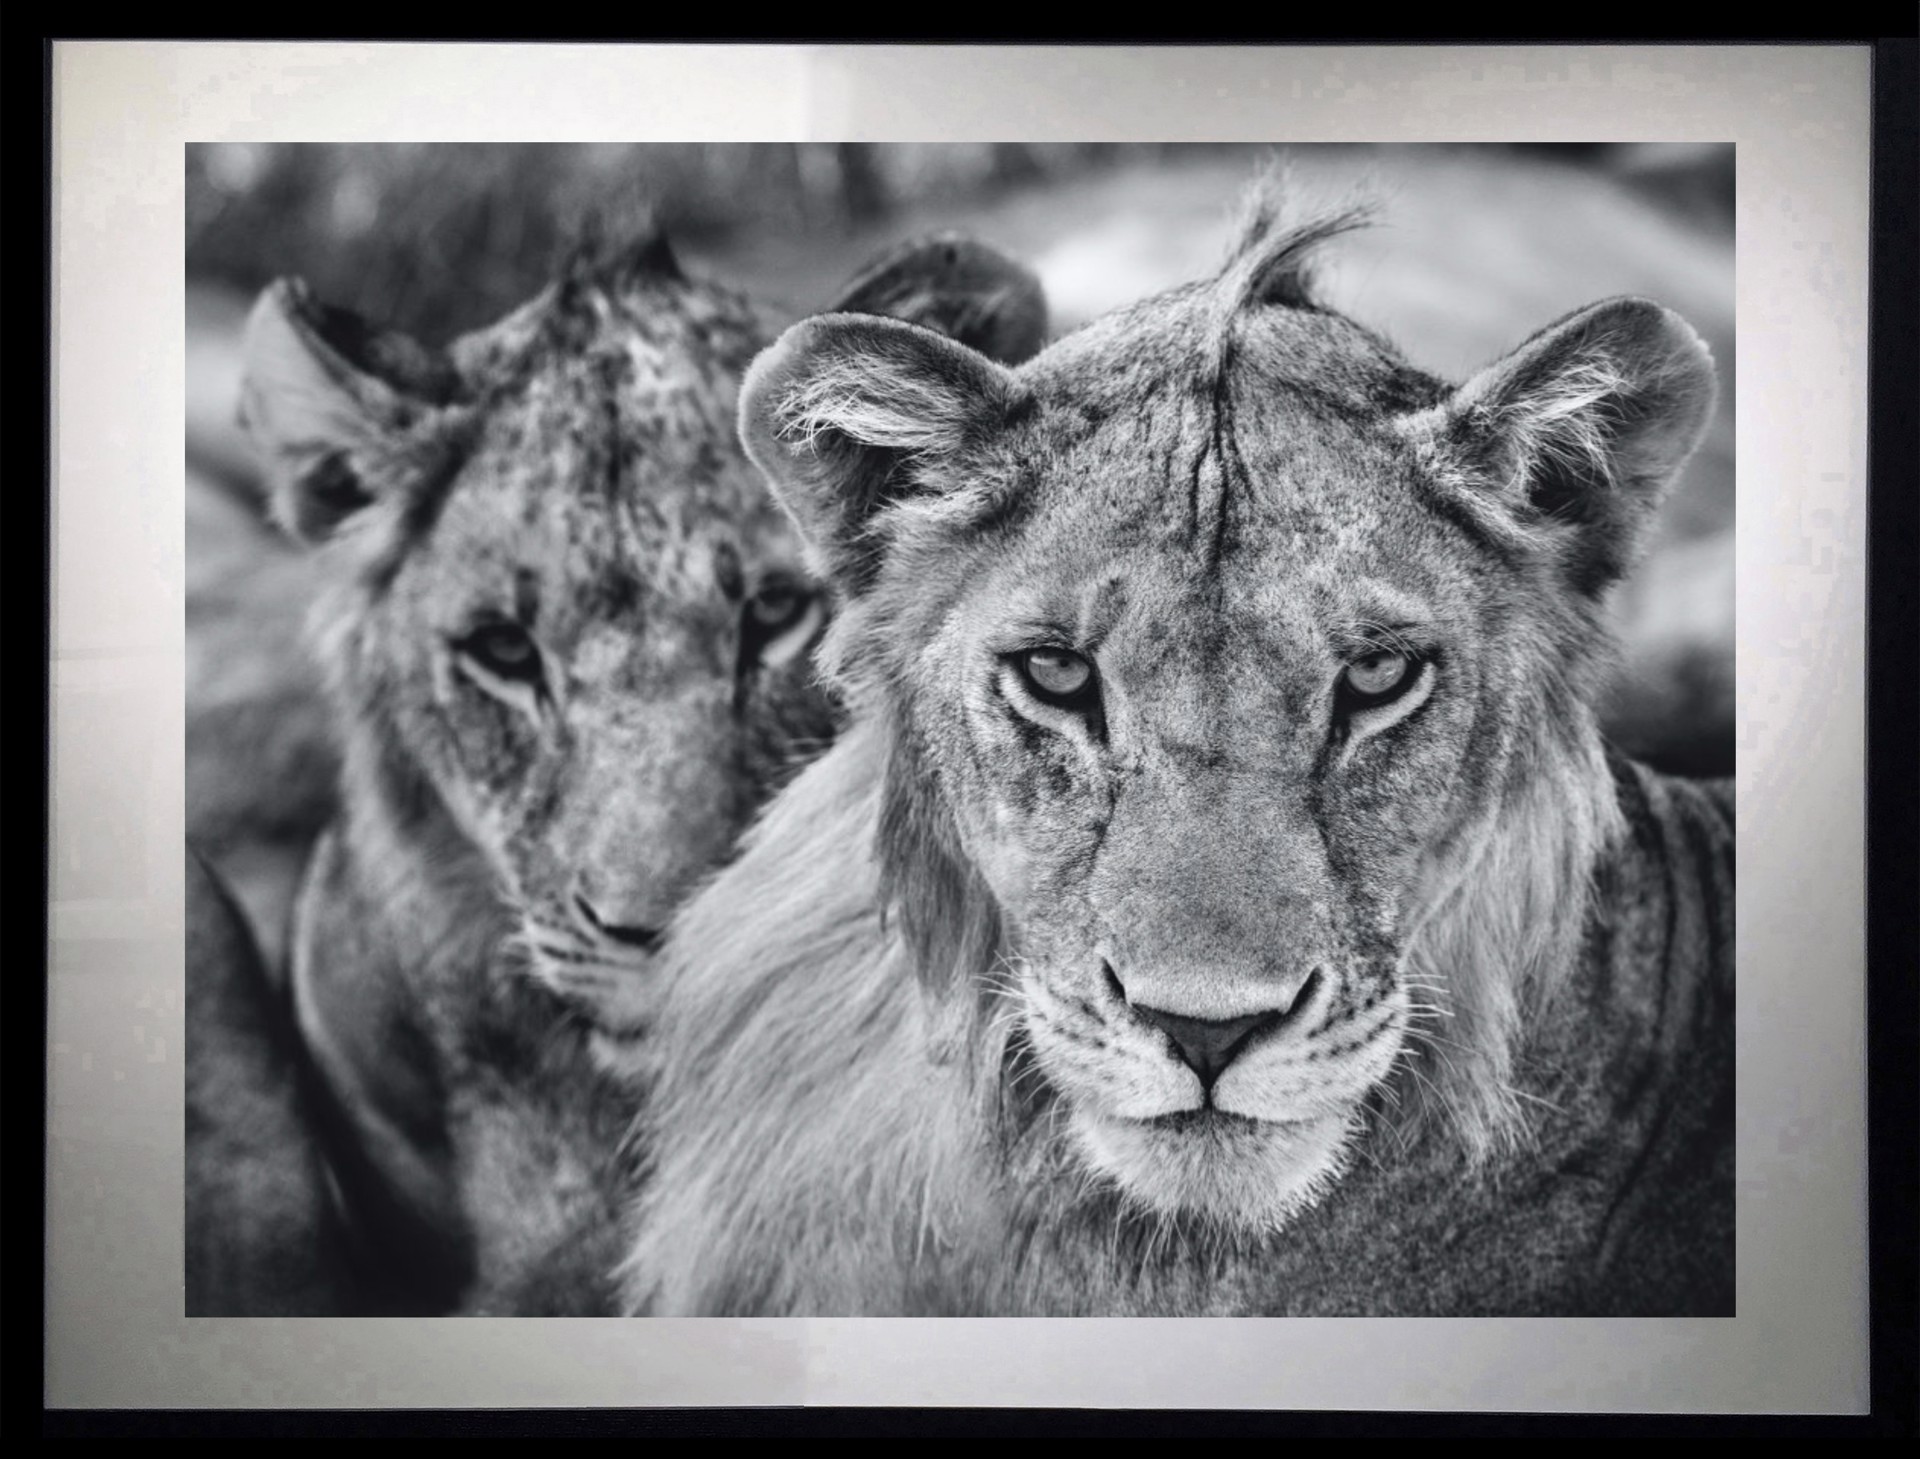 The Boys Are Back in Town by David Yarrow